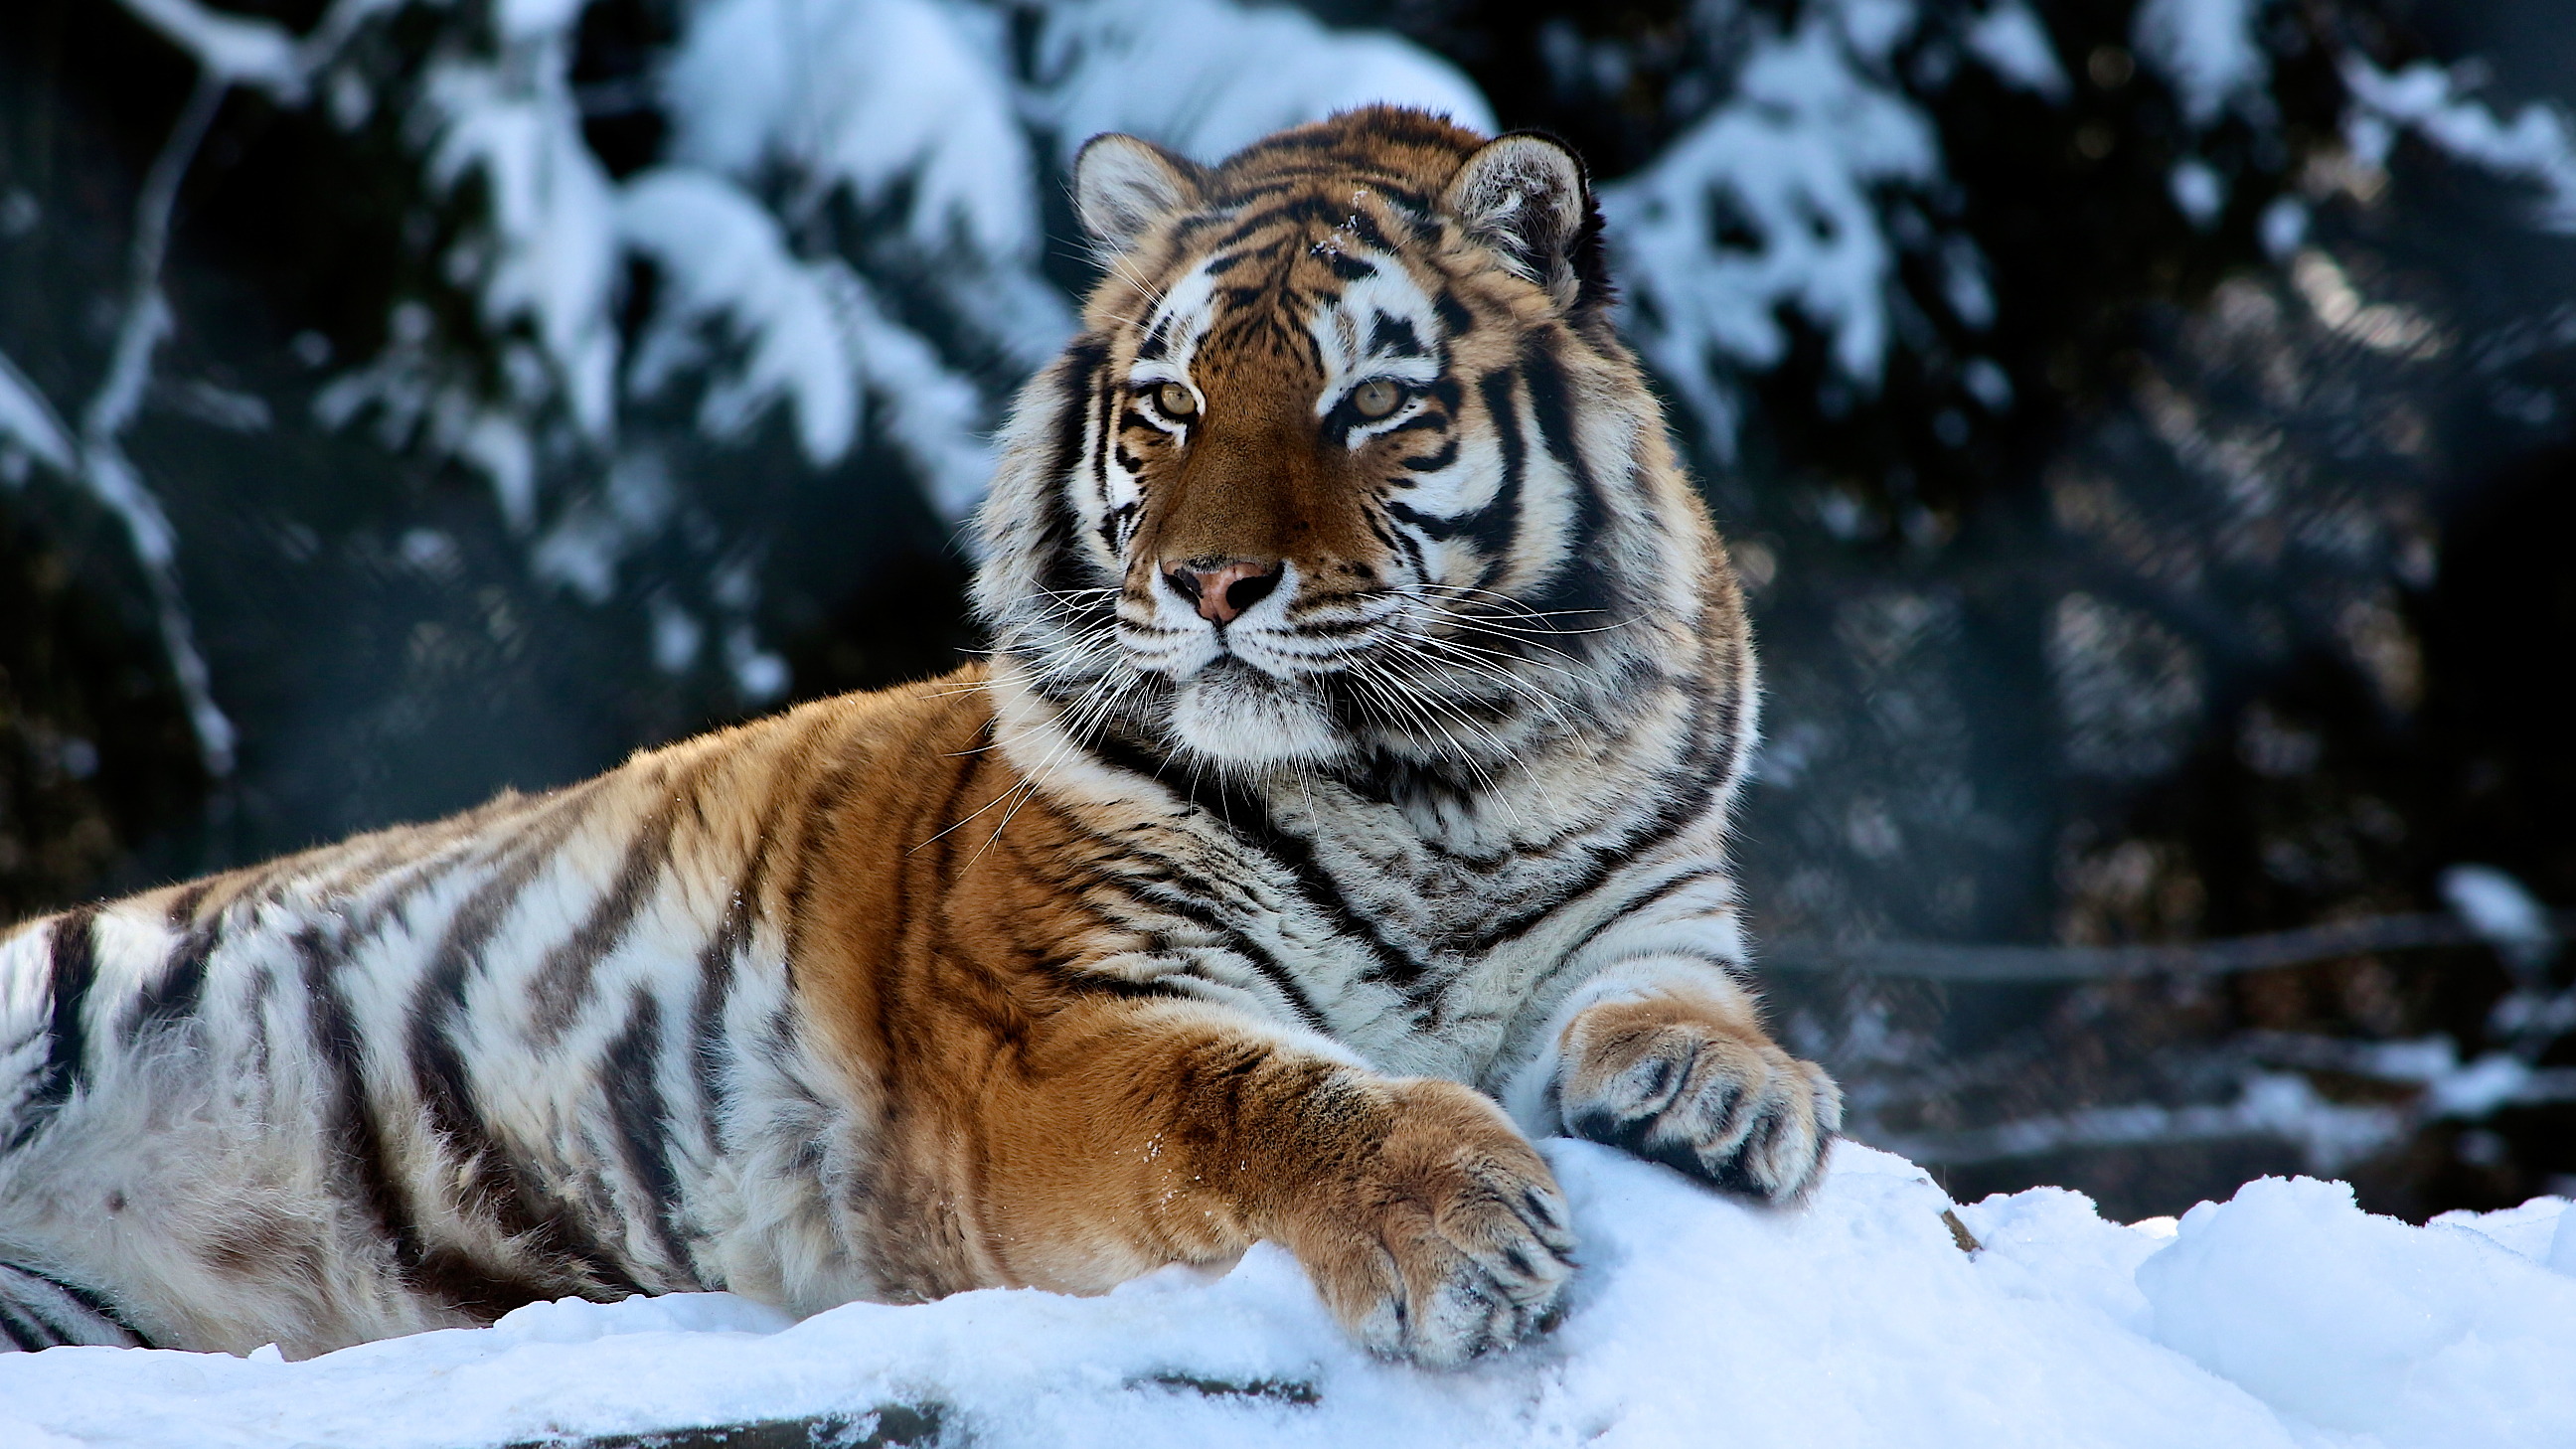 General 2592x1458 animals tiger feline big cats mammals cat eyes outdoors whiskers winter snow stripes nature fur blurry background